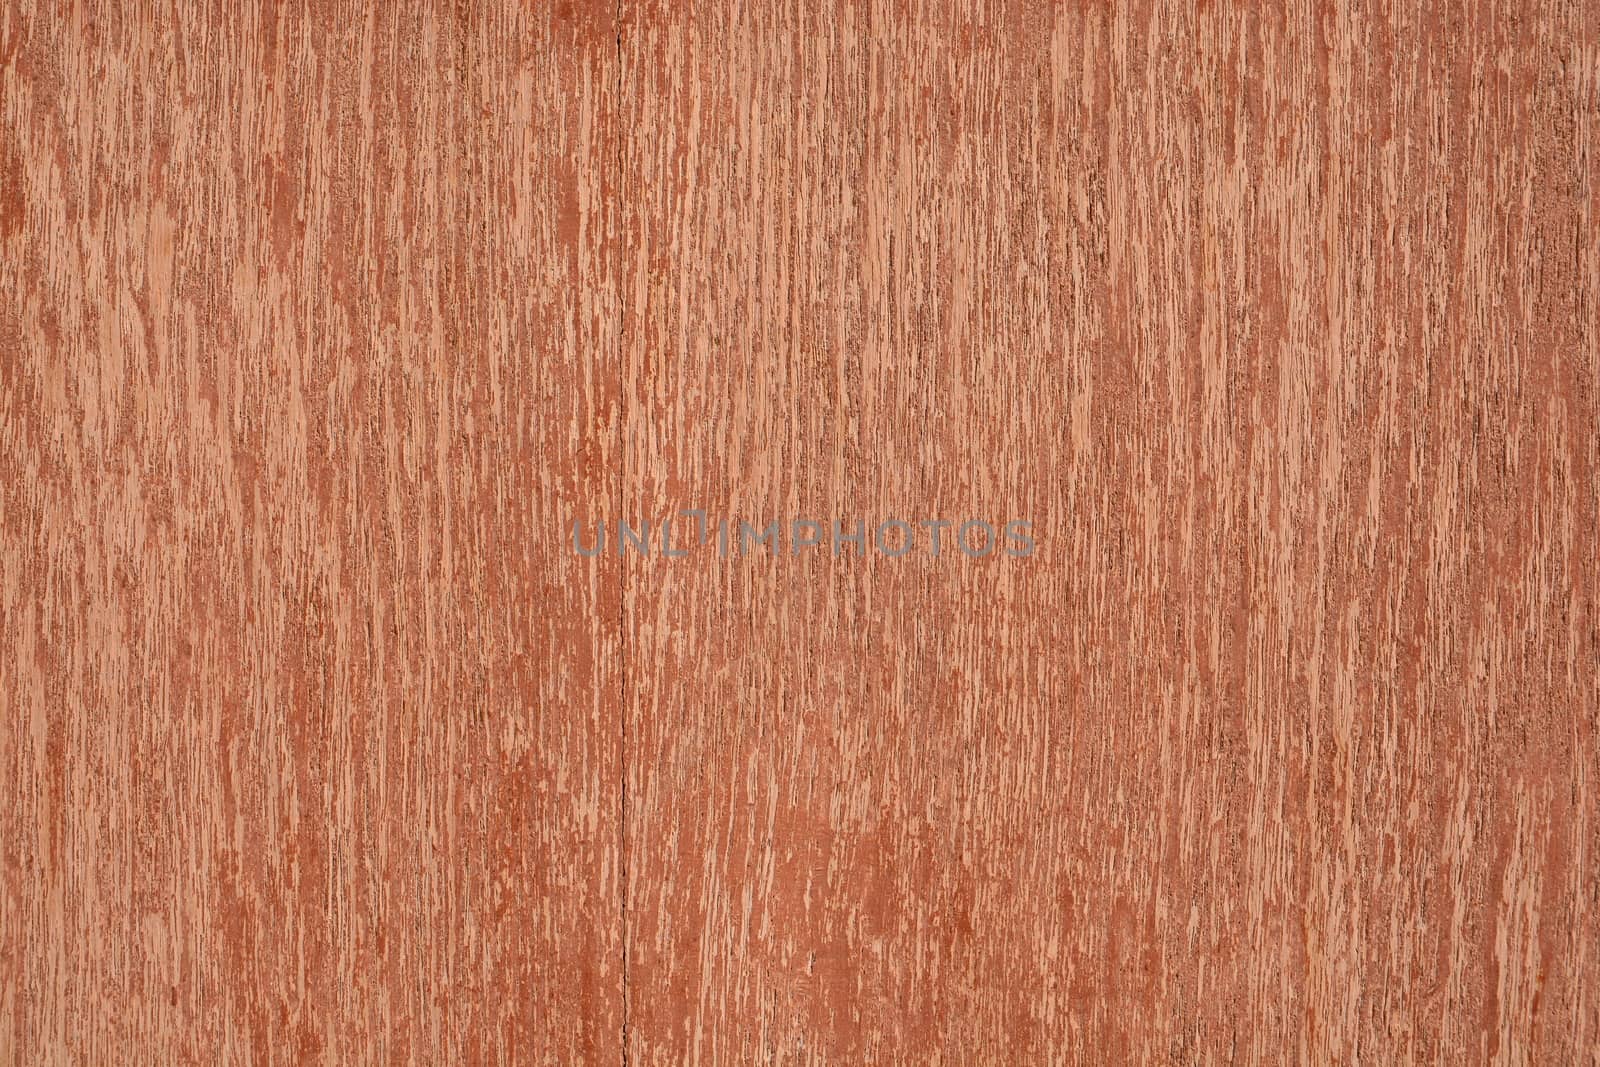 background and texture of pine wood decorative furniture surface